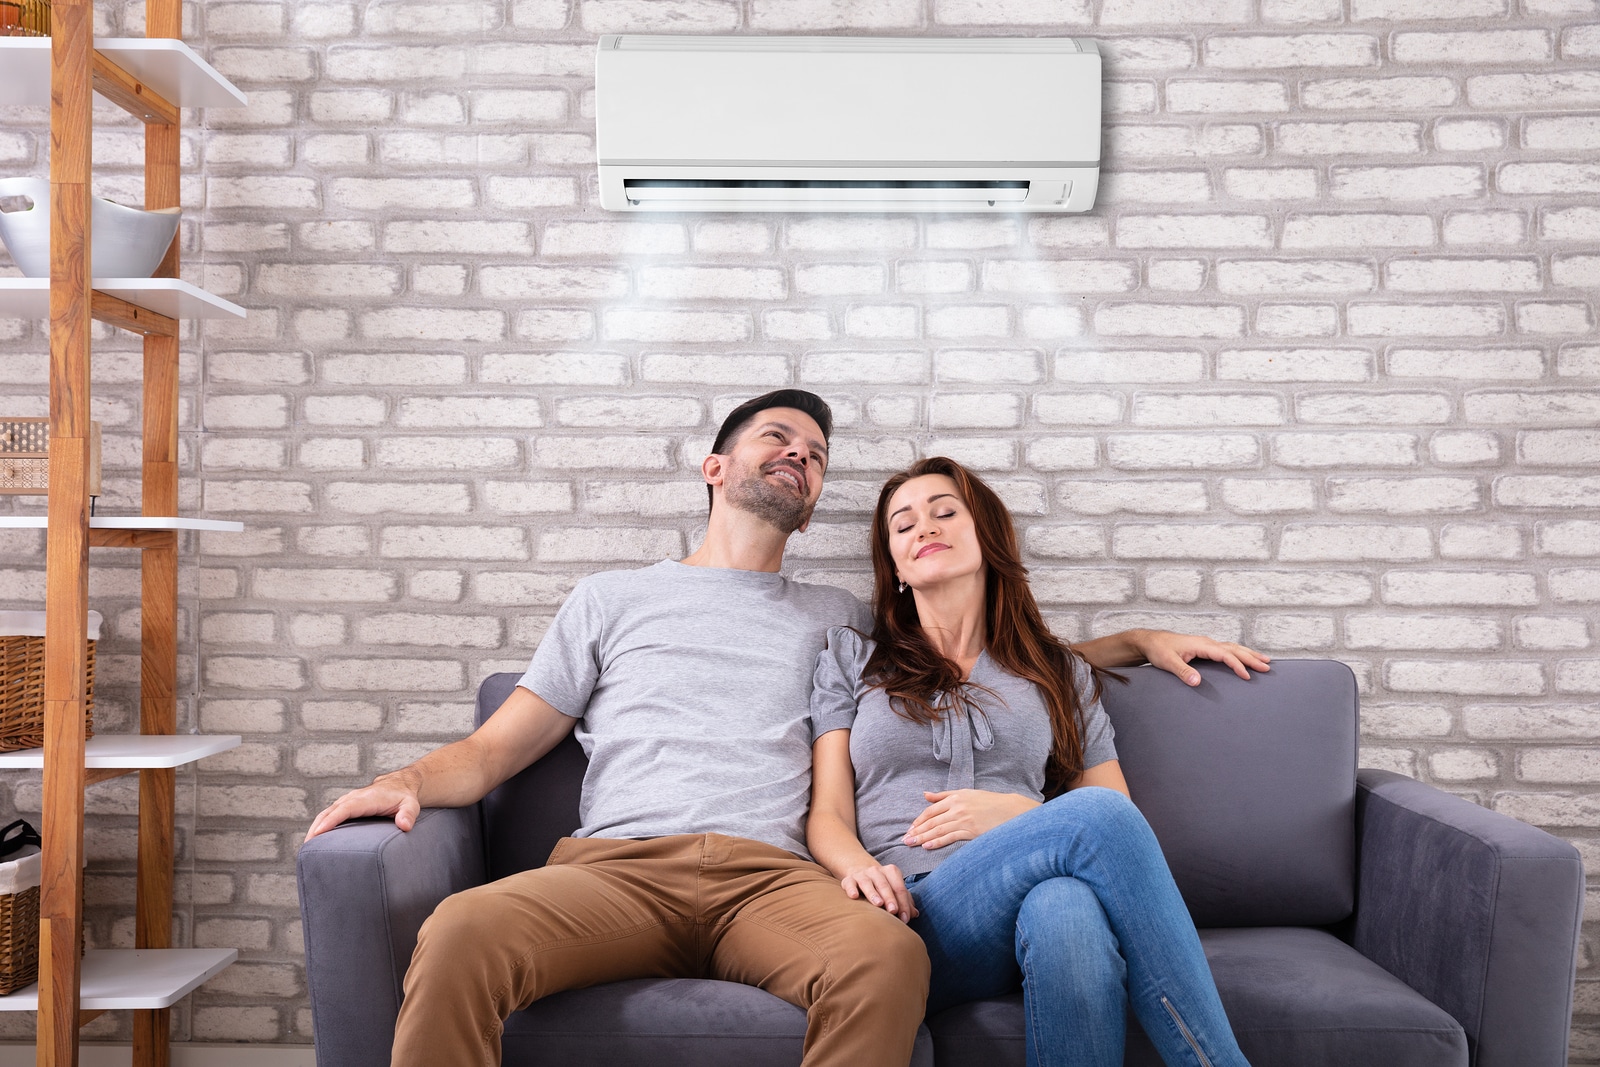 List of the Best Eco-friendly Air Conditioners